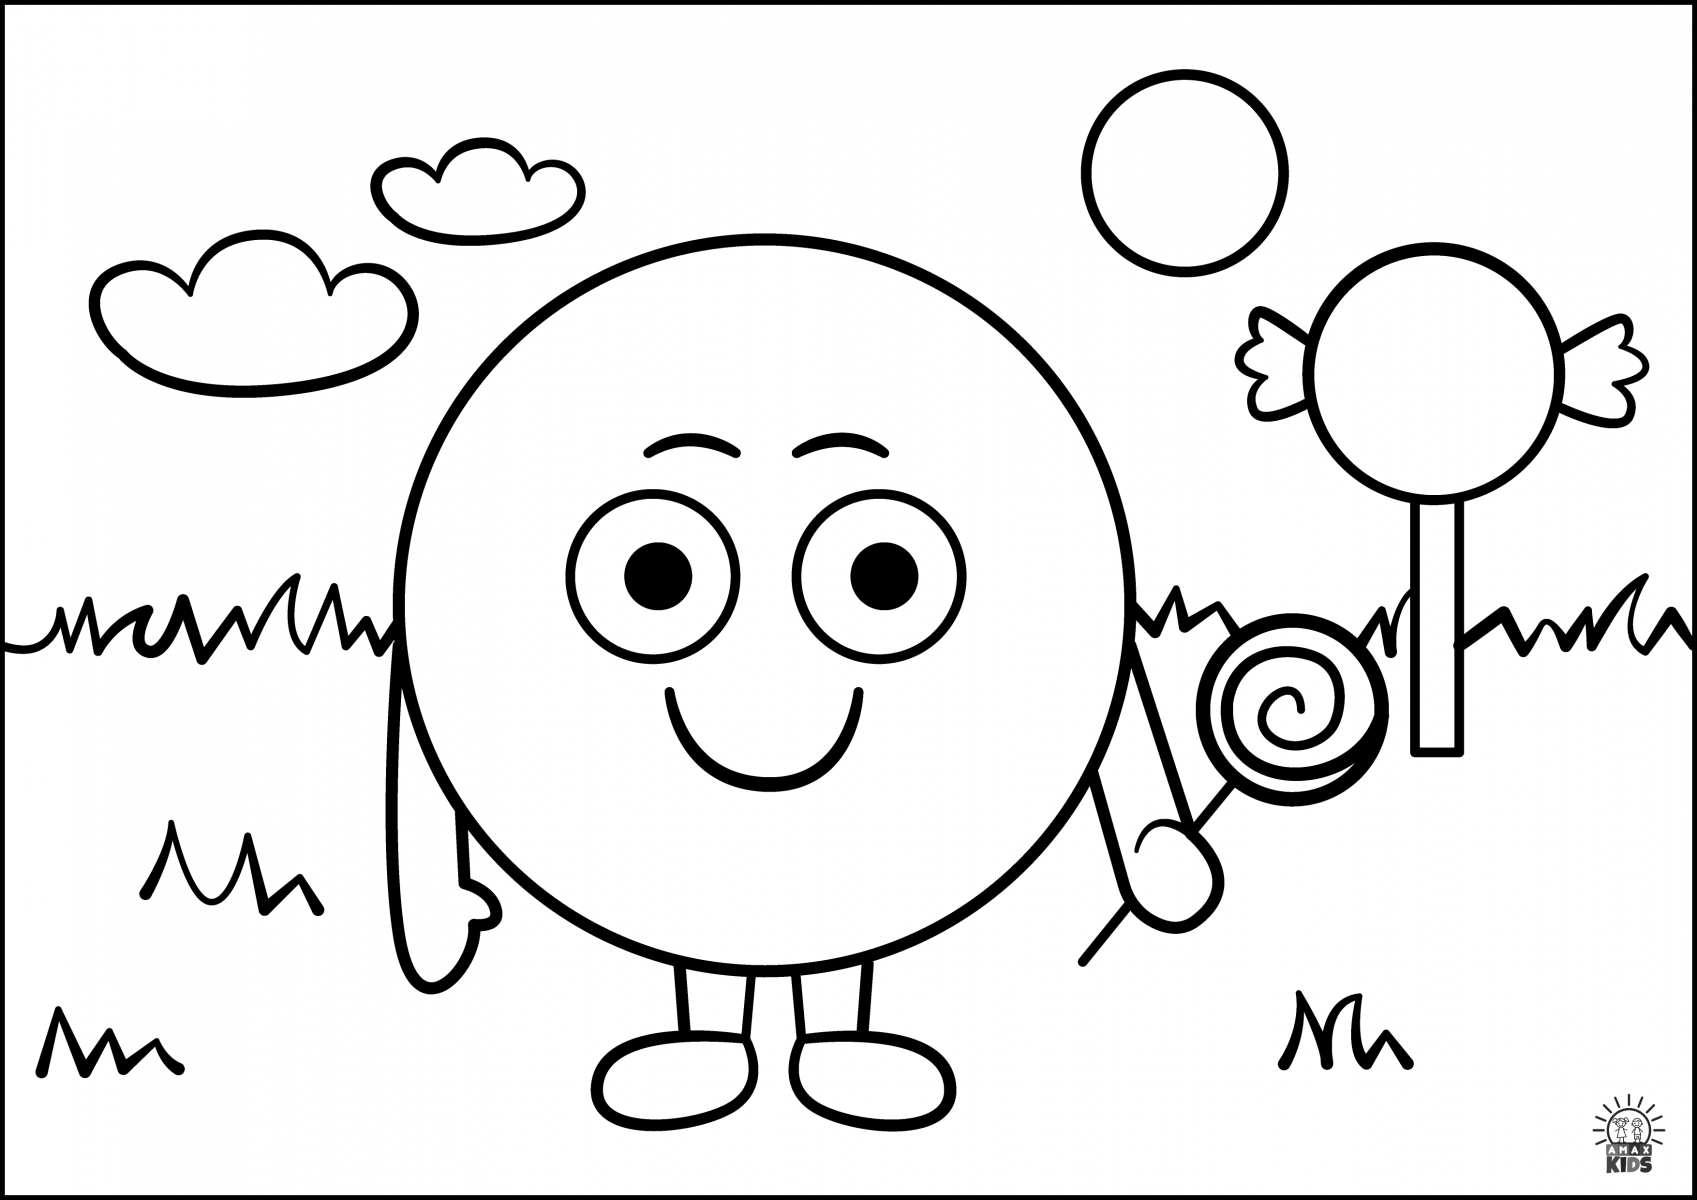 kids shapes coloring pages